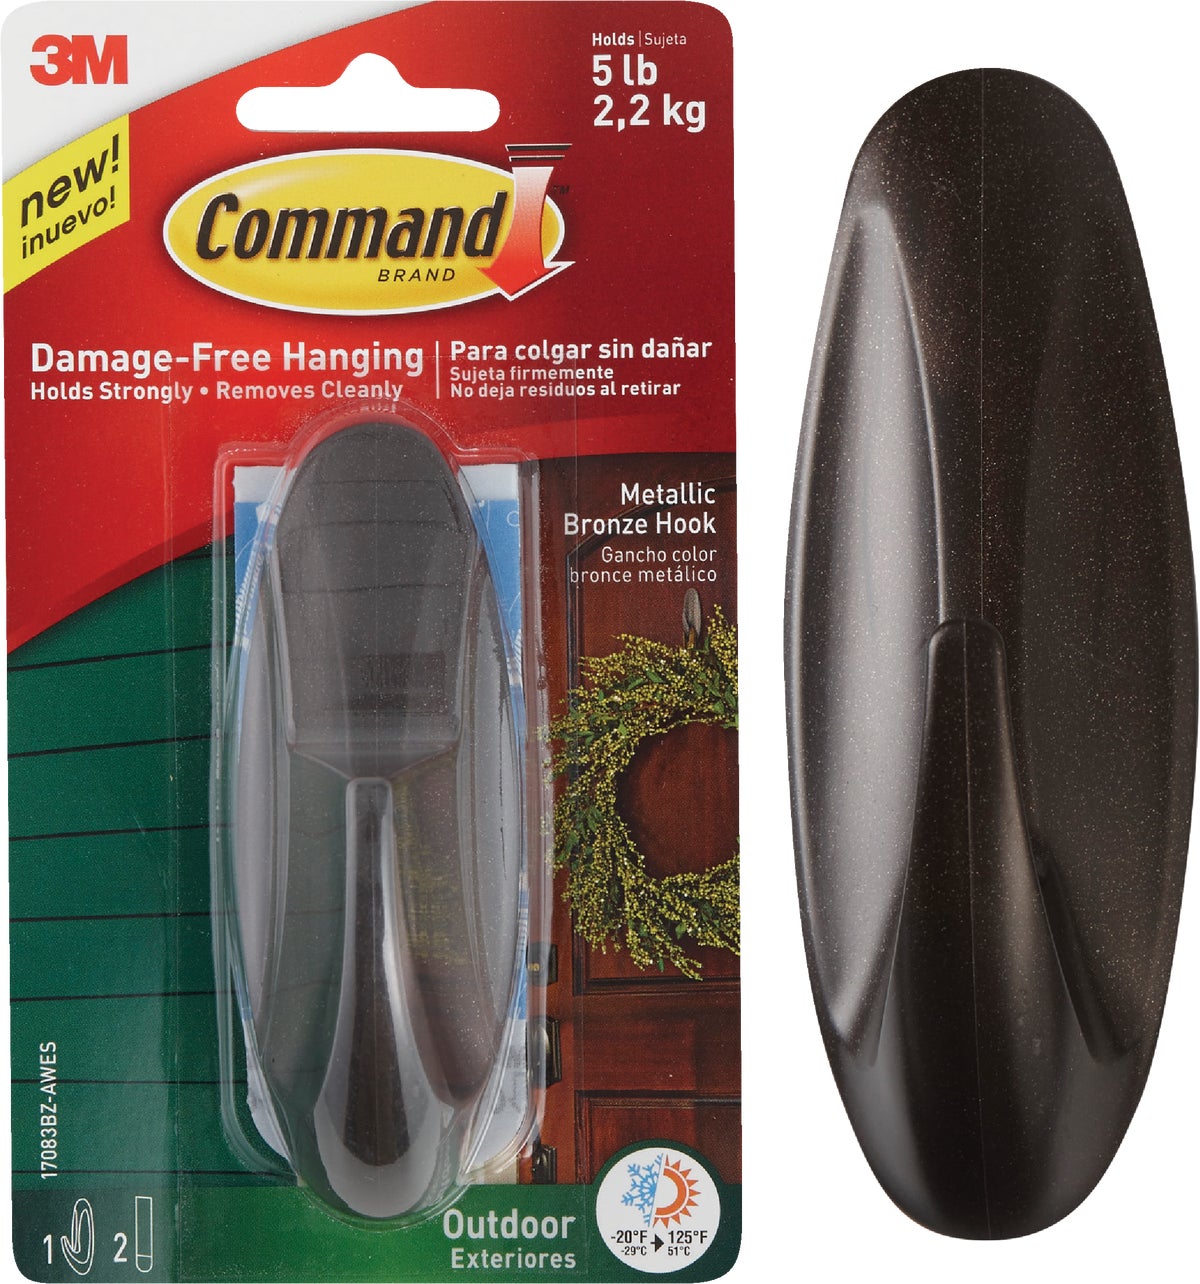 3M Command Outdoor Large Desi 3M Cmd Outdoor Hook Bronze Lrg,Size 1CT,Pack of 3 